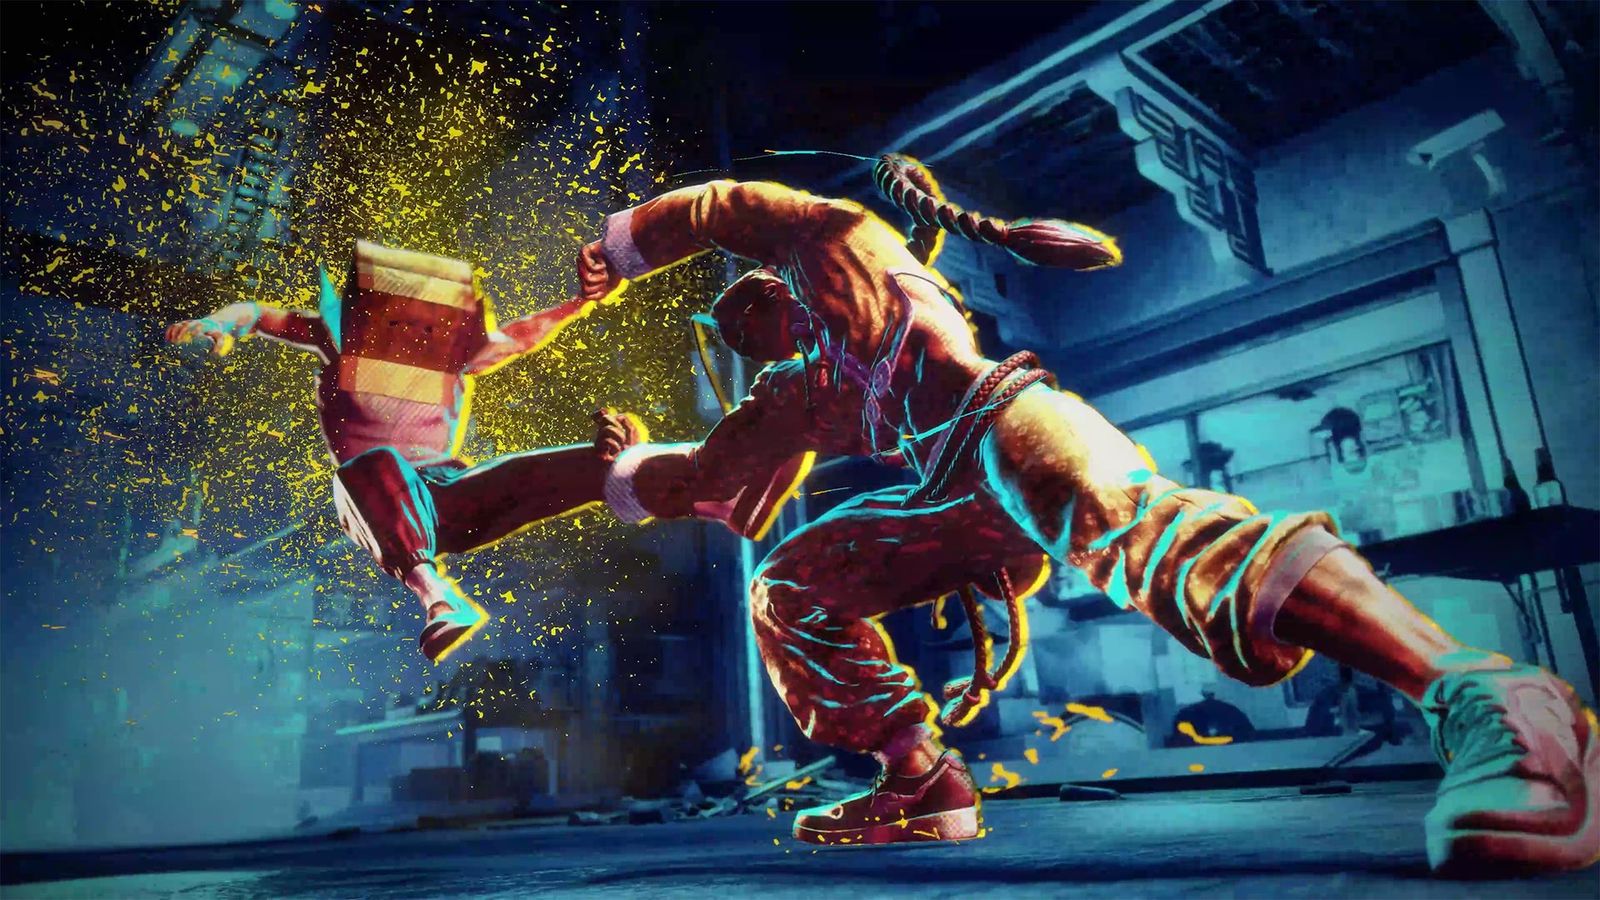 A promotional image of Street Fighter 6.